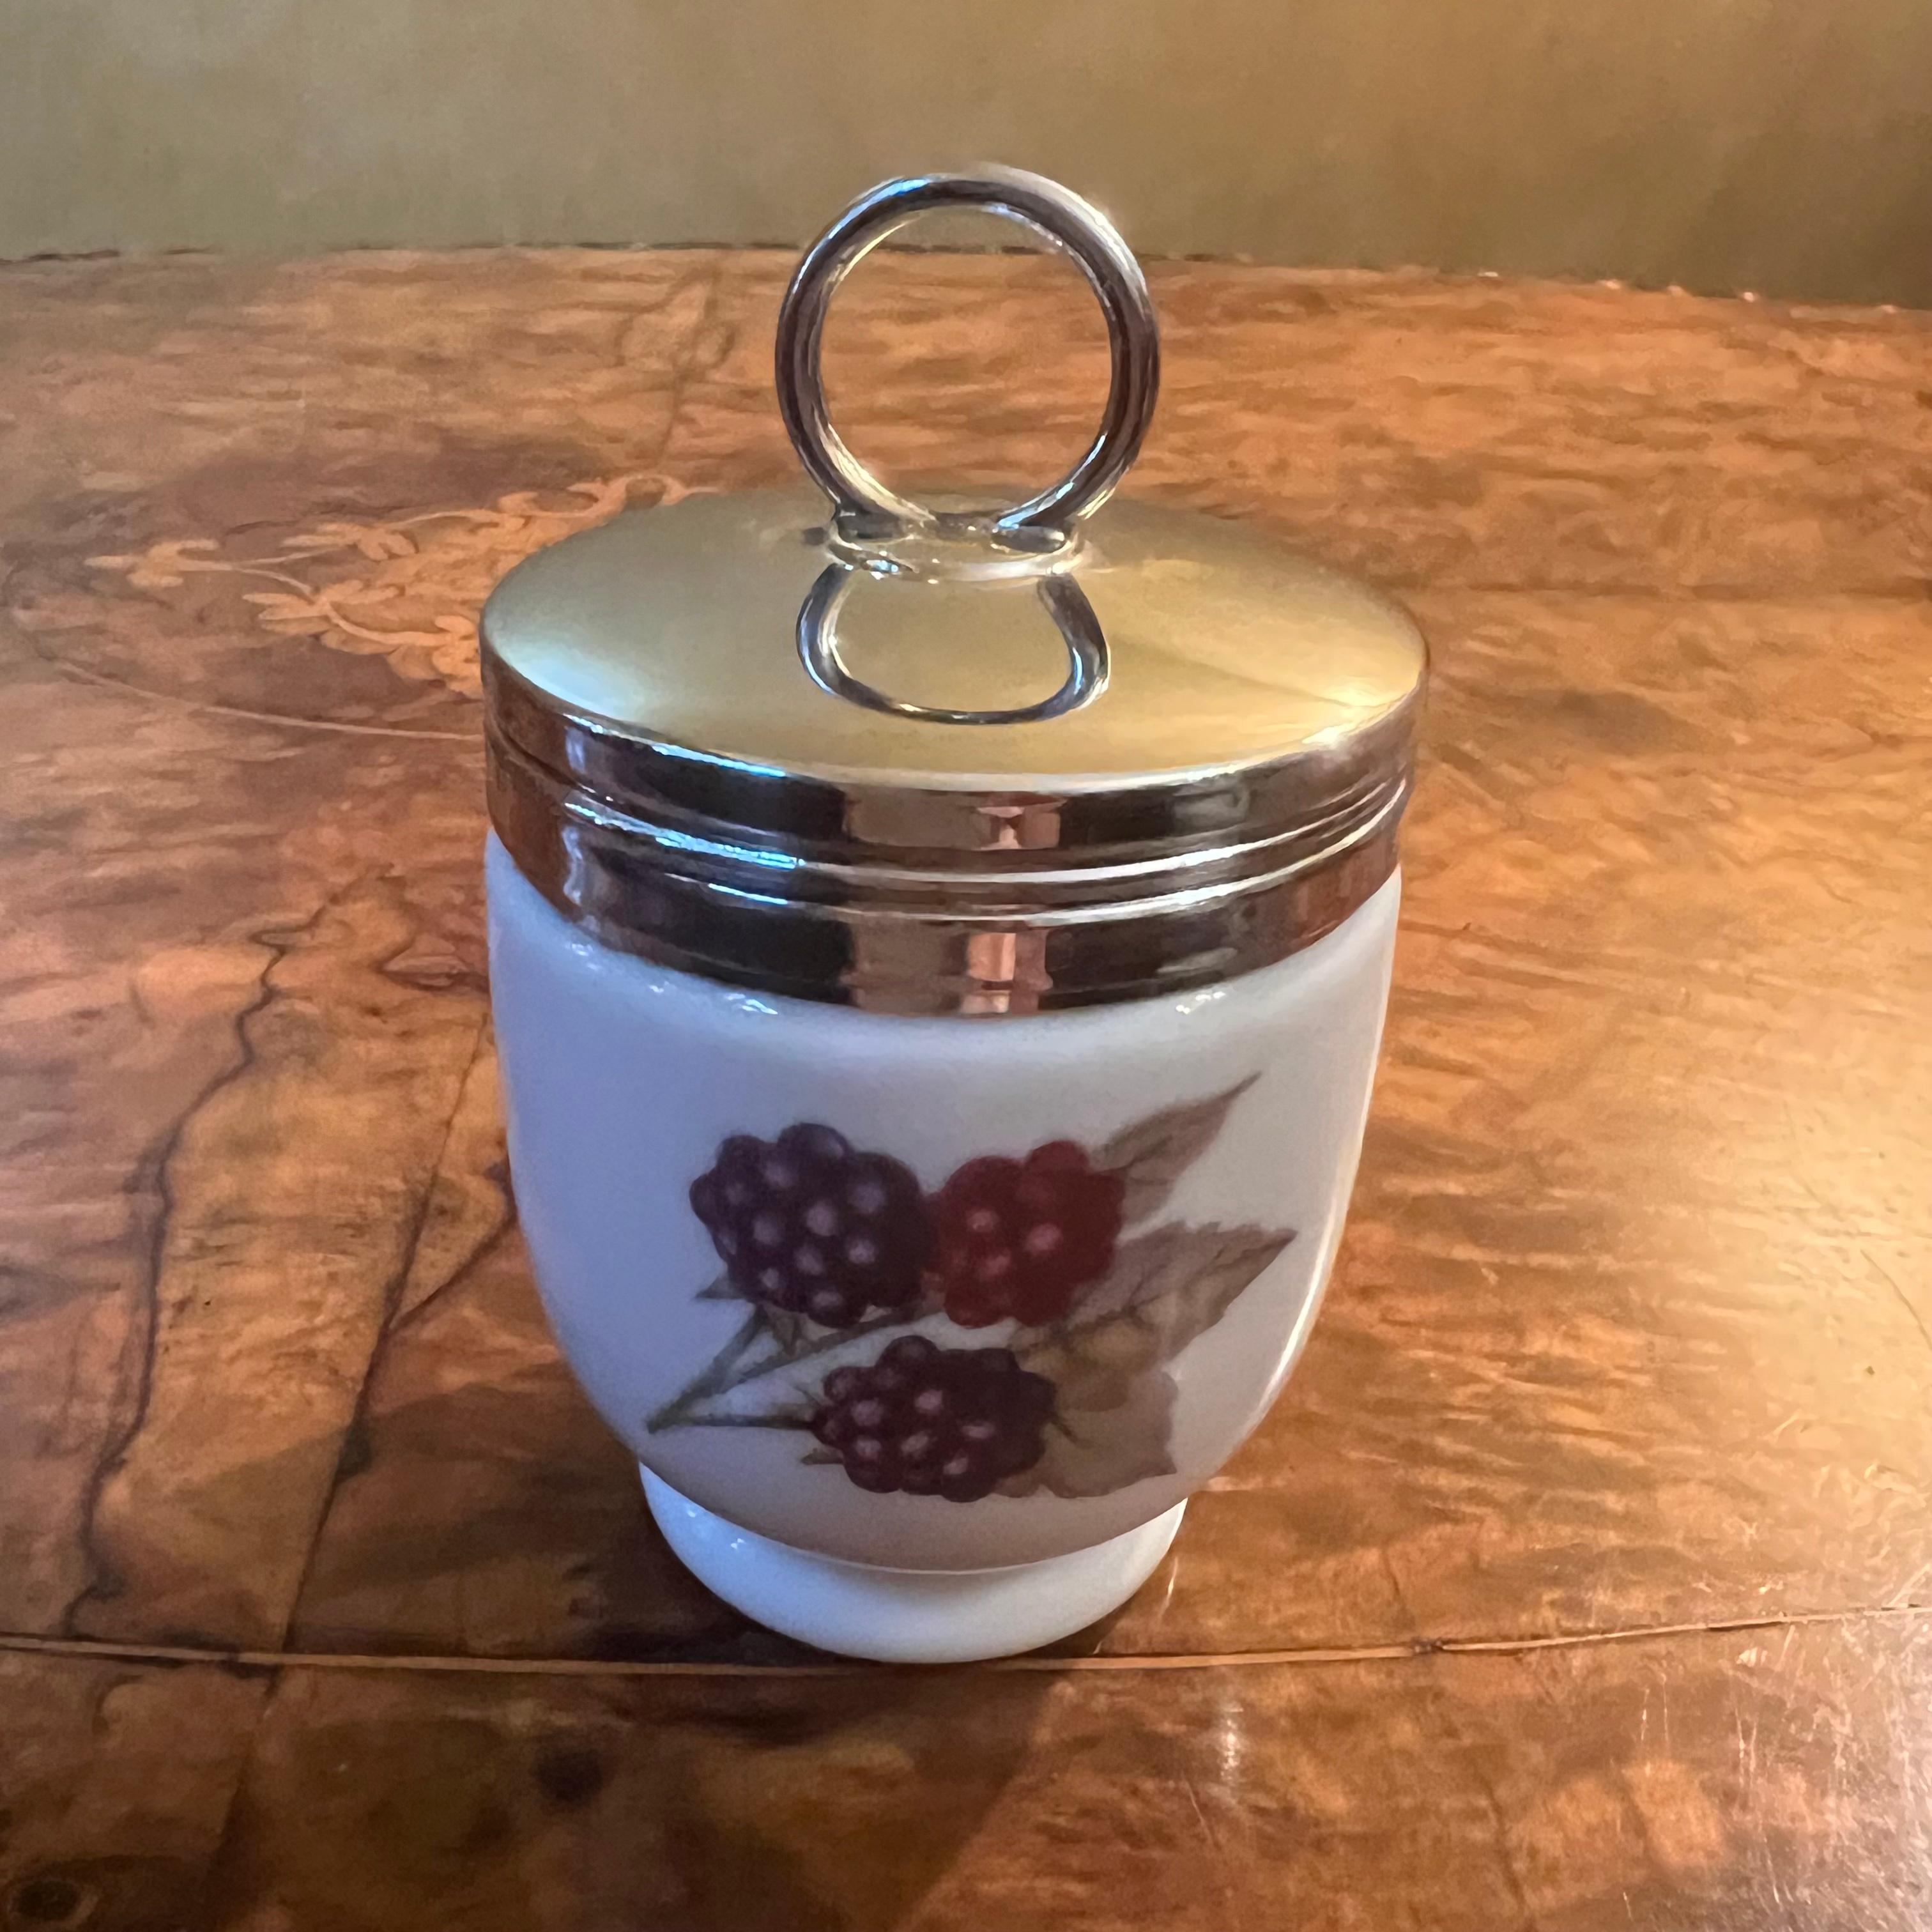 Fruit print berries, some ware to print, metal lid that screws on, mark inside of lid,  stamped Royal Worcester

Material: Porcelain 

Country Of Origin: England 

Measurements: 9cm high, 5cm diameter 

Postage via Australia Post with tracking